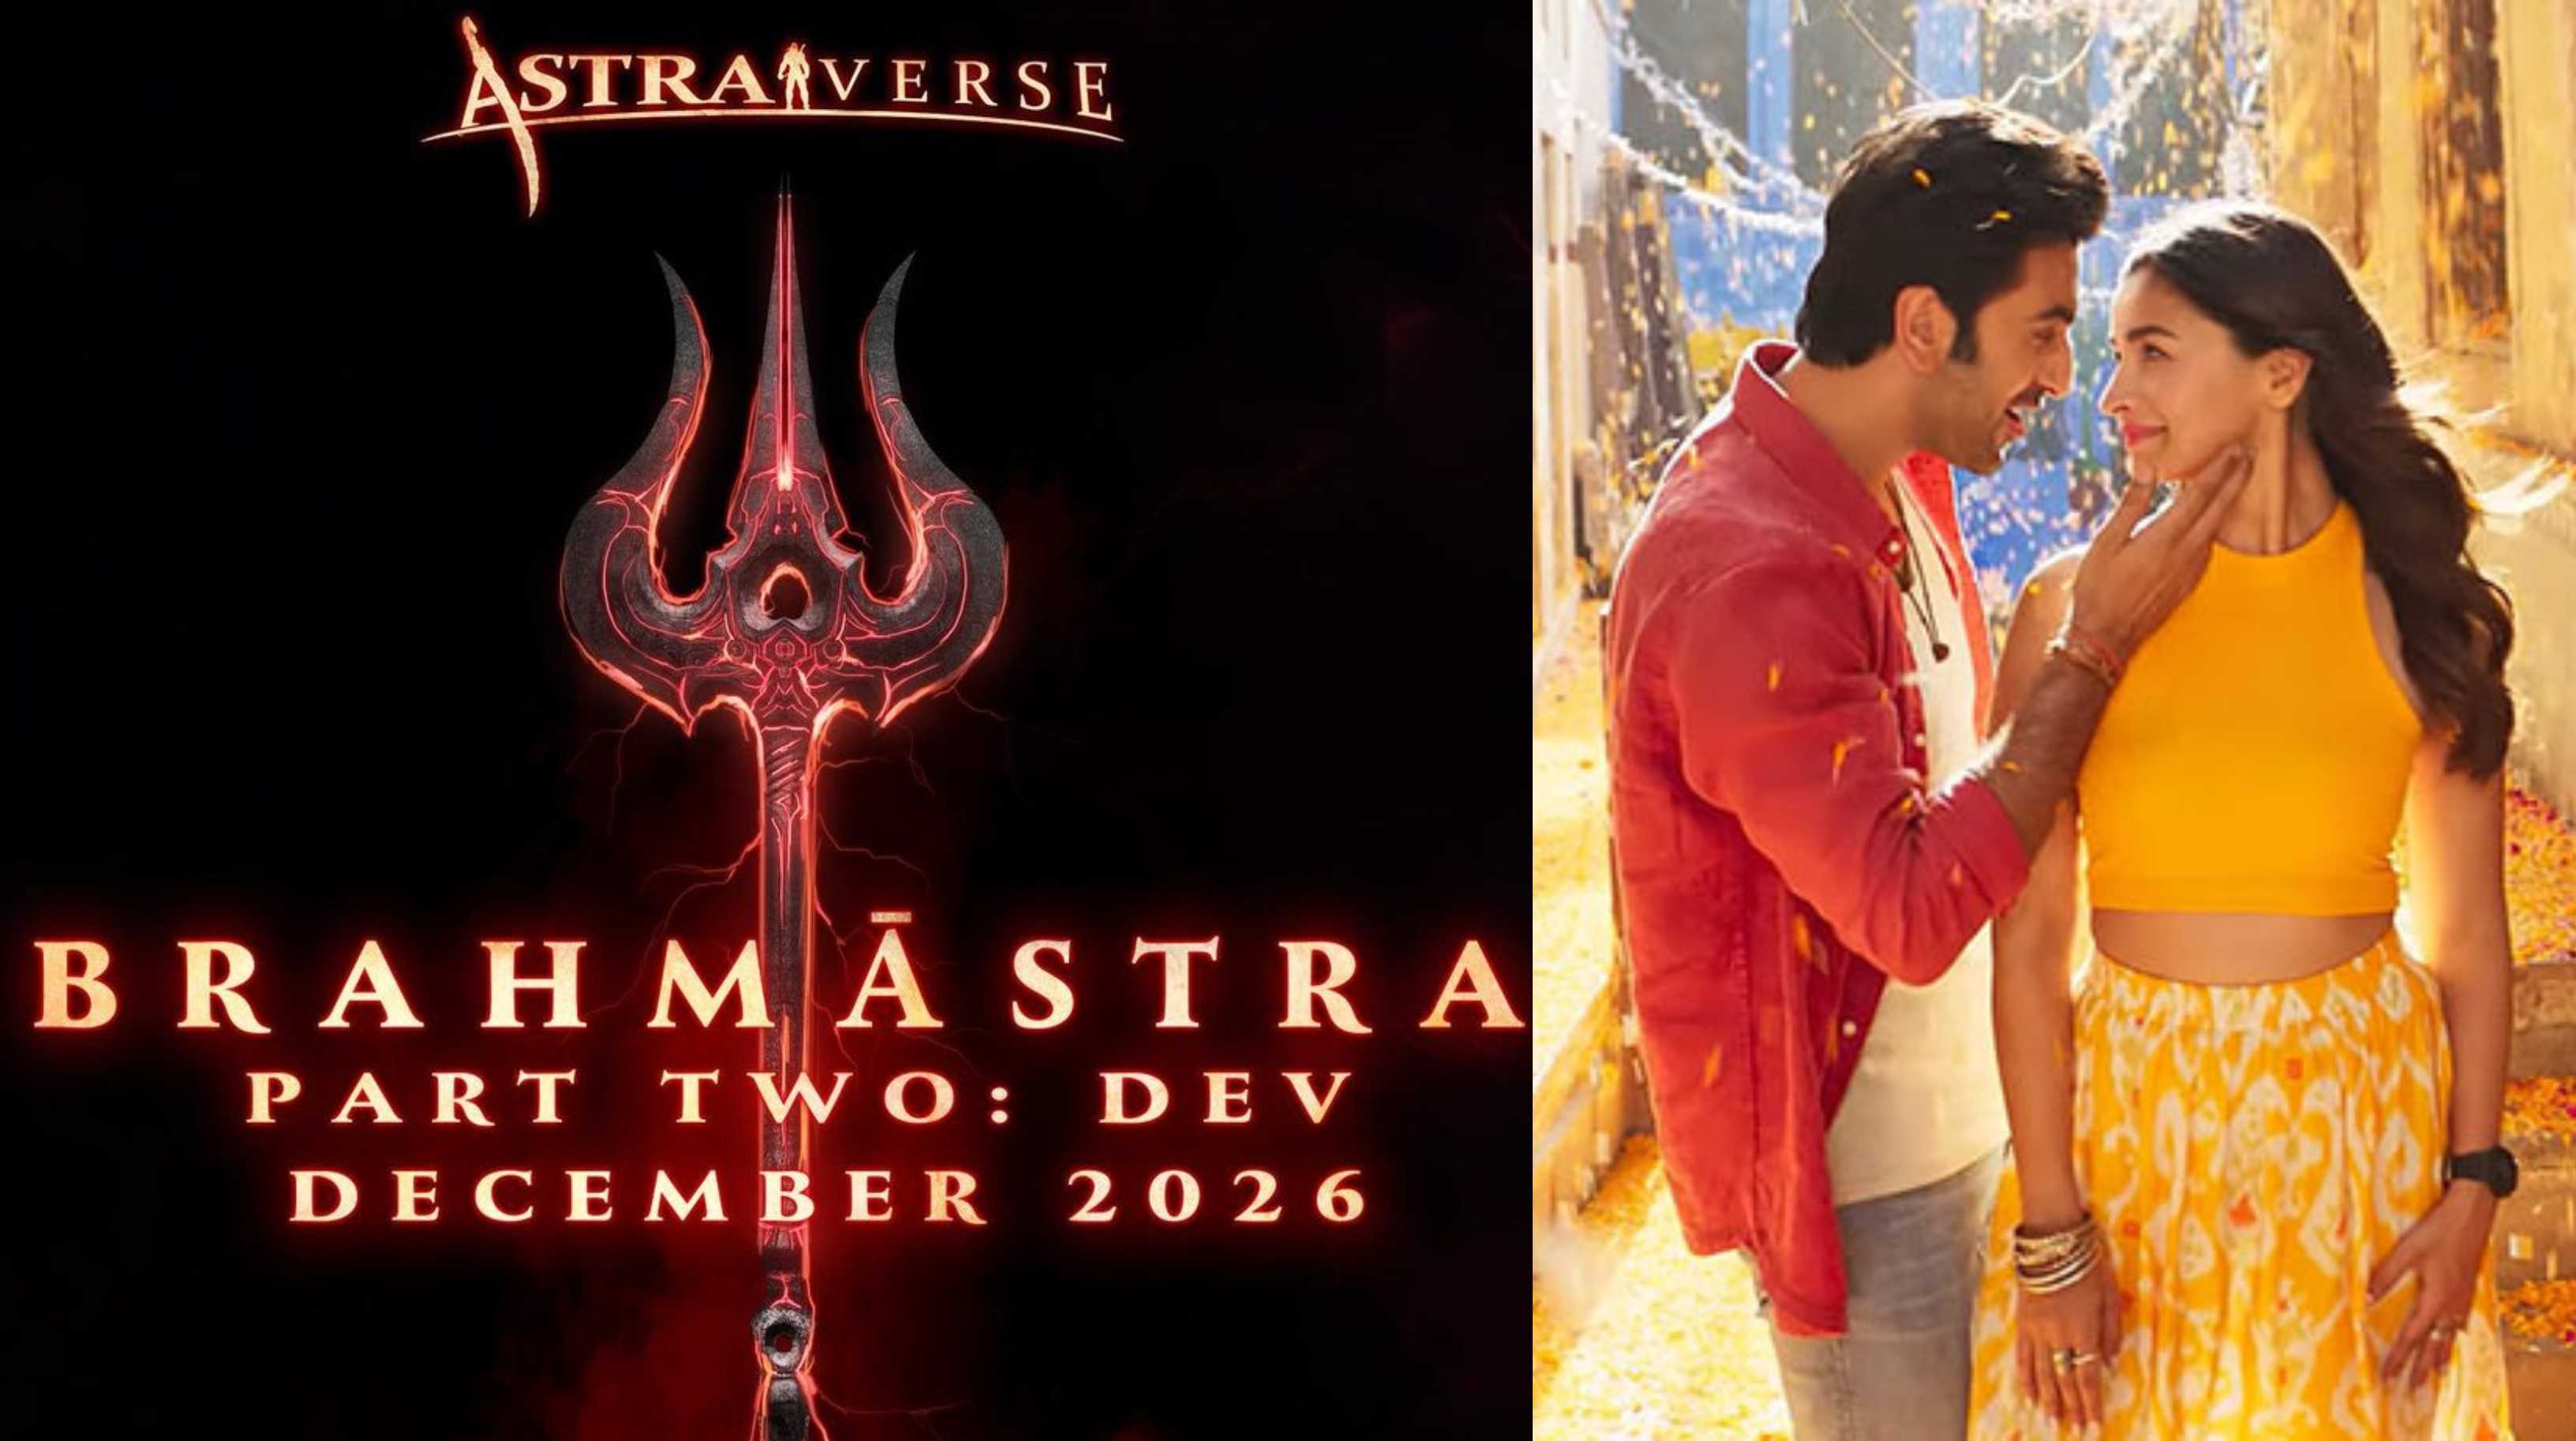 ‘Raha will be 4yrs old’: Ayan Mukerji announces release of Brahmastra Part 2 and 3 but fans are not impressed